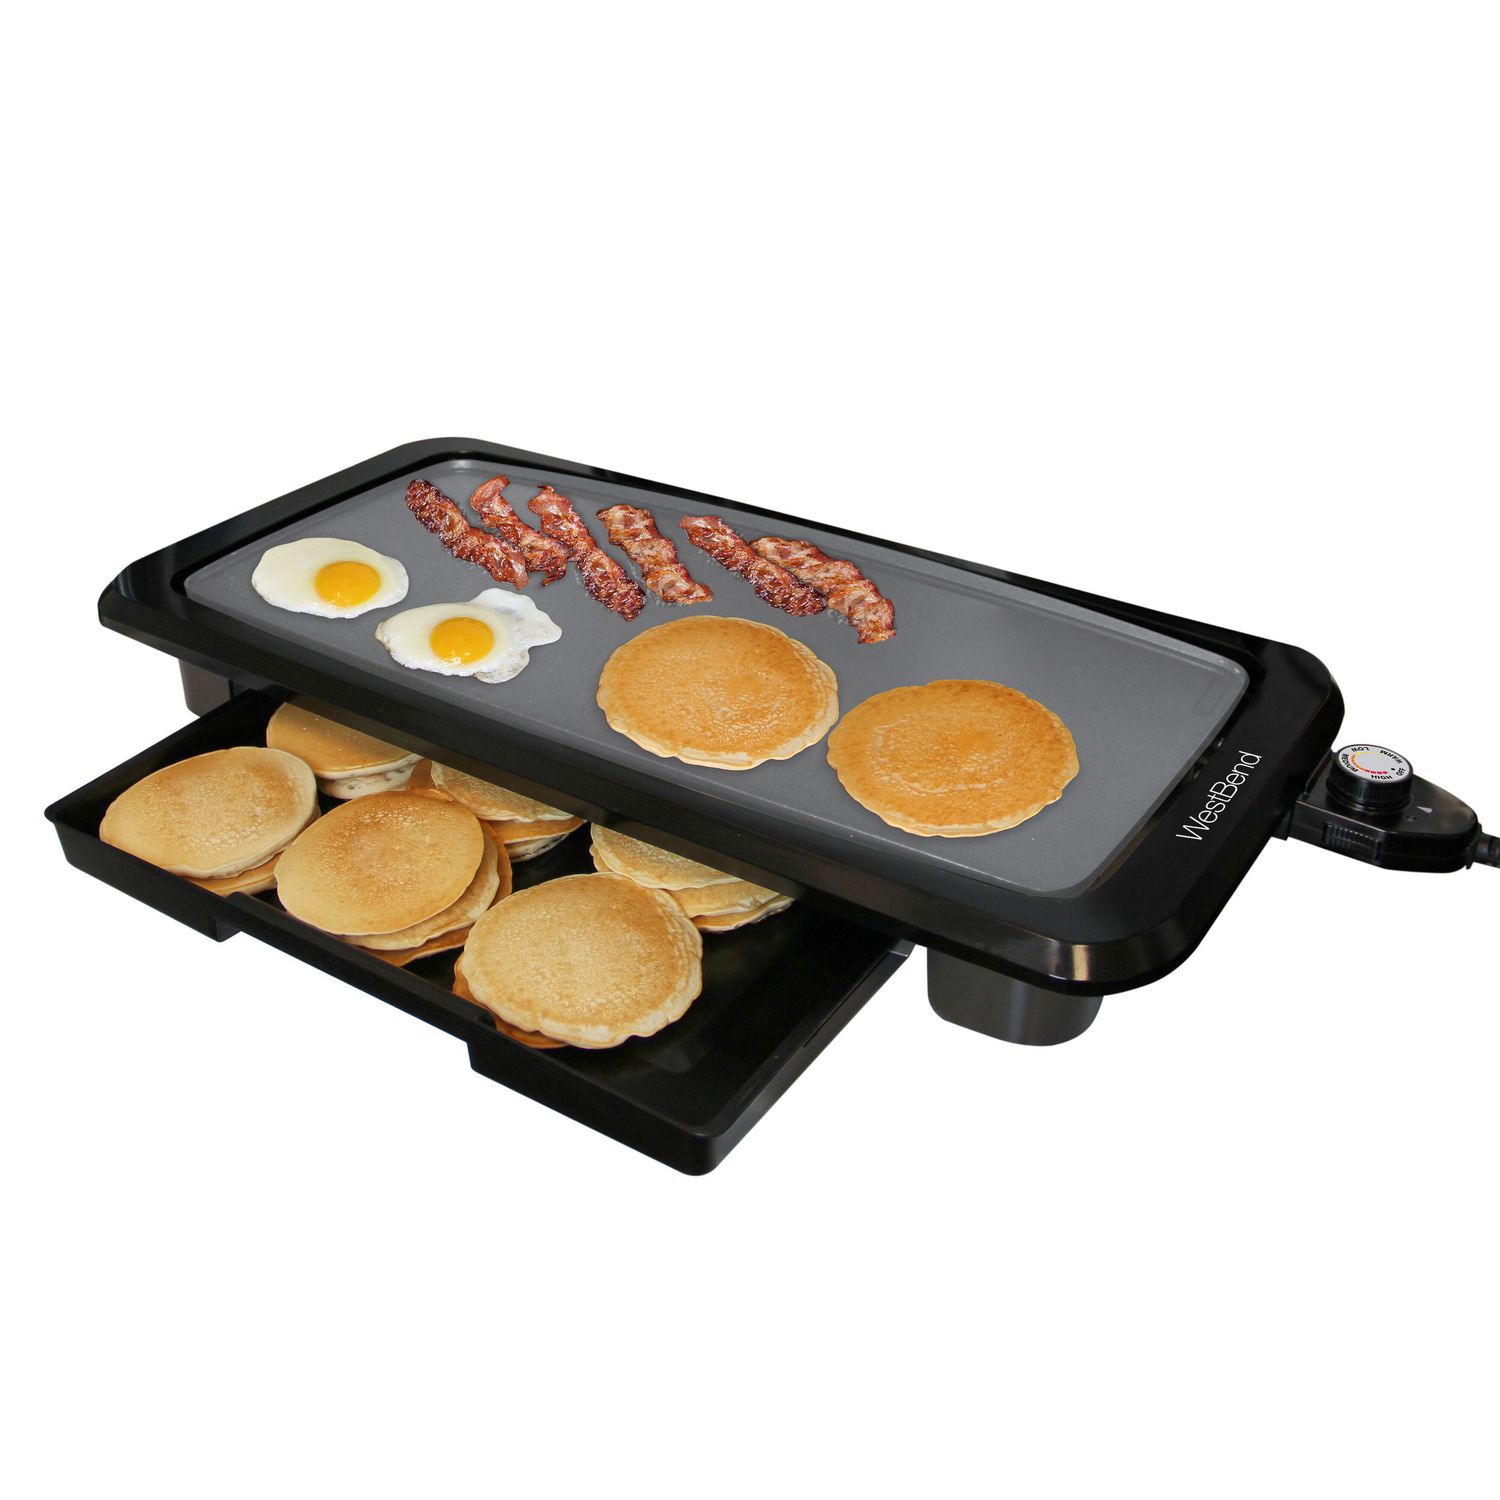 West Bend 66169 ExtraLarge Electric Griddle Walmart Canada